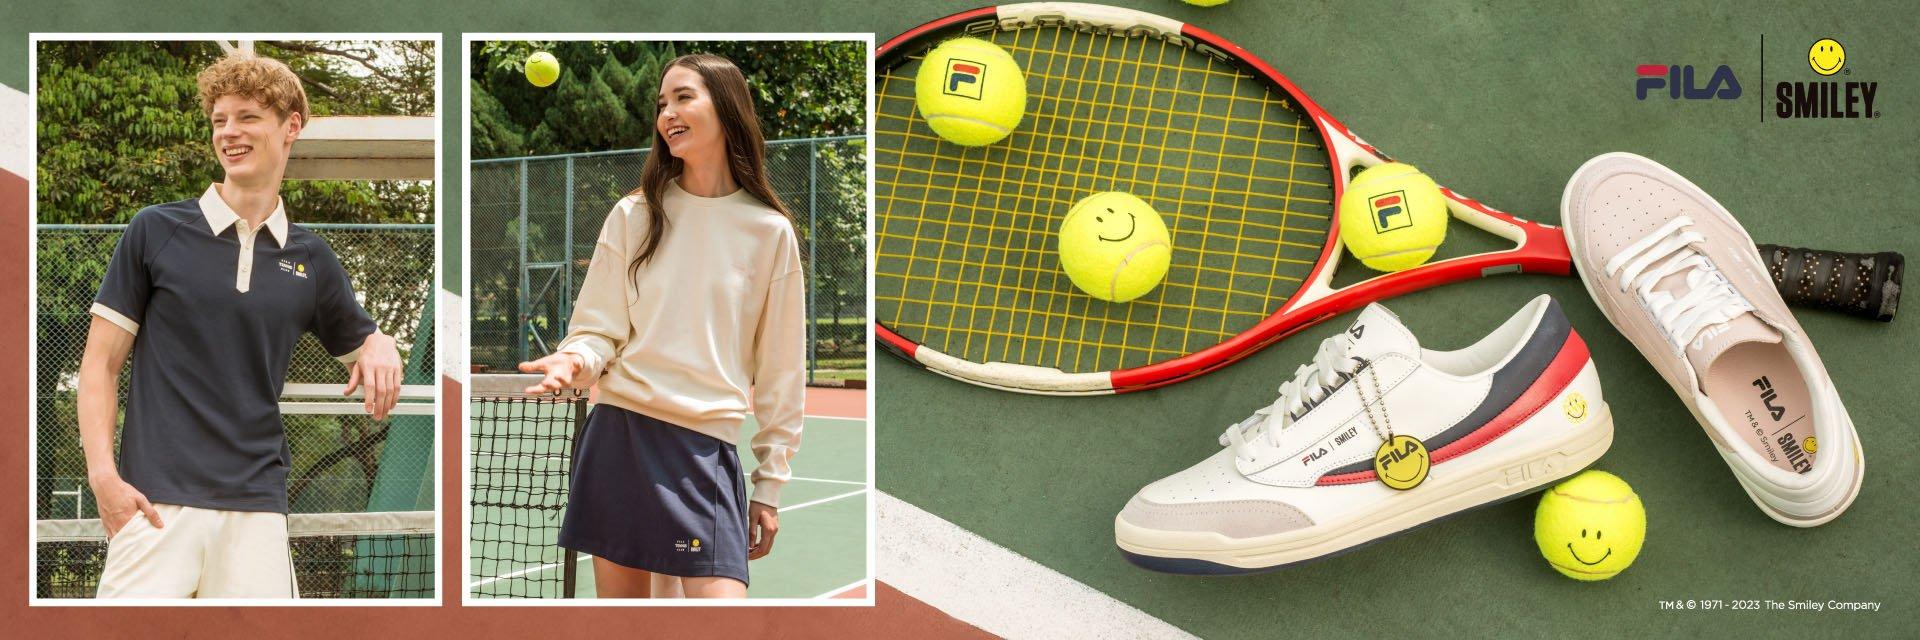 Fila Shoes and Clothing for Men, Women and Kids